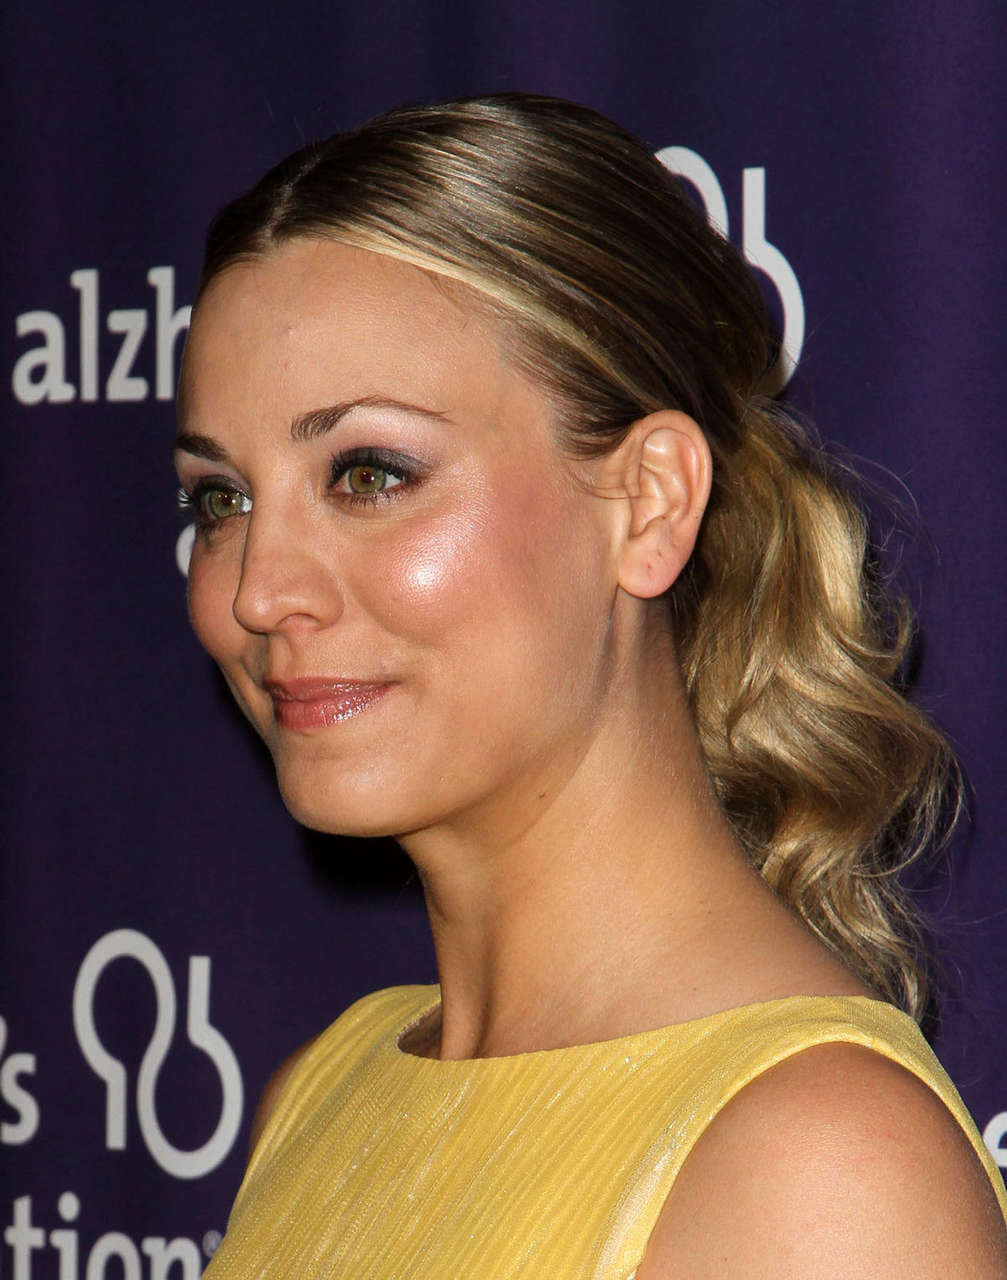 Kaley Cuoco 20th Anniversary Alzheimers Association Beverly Hills